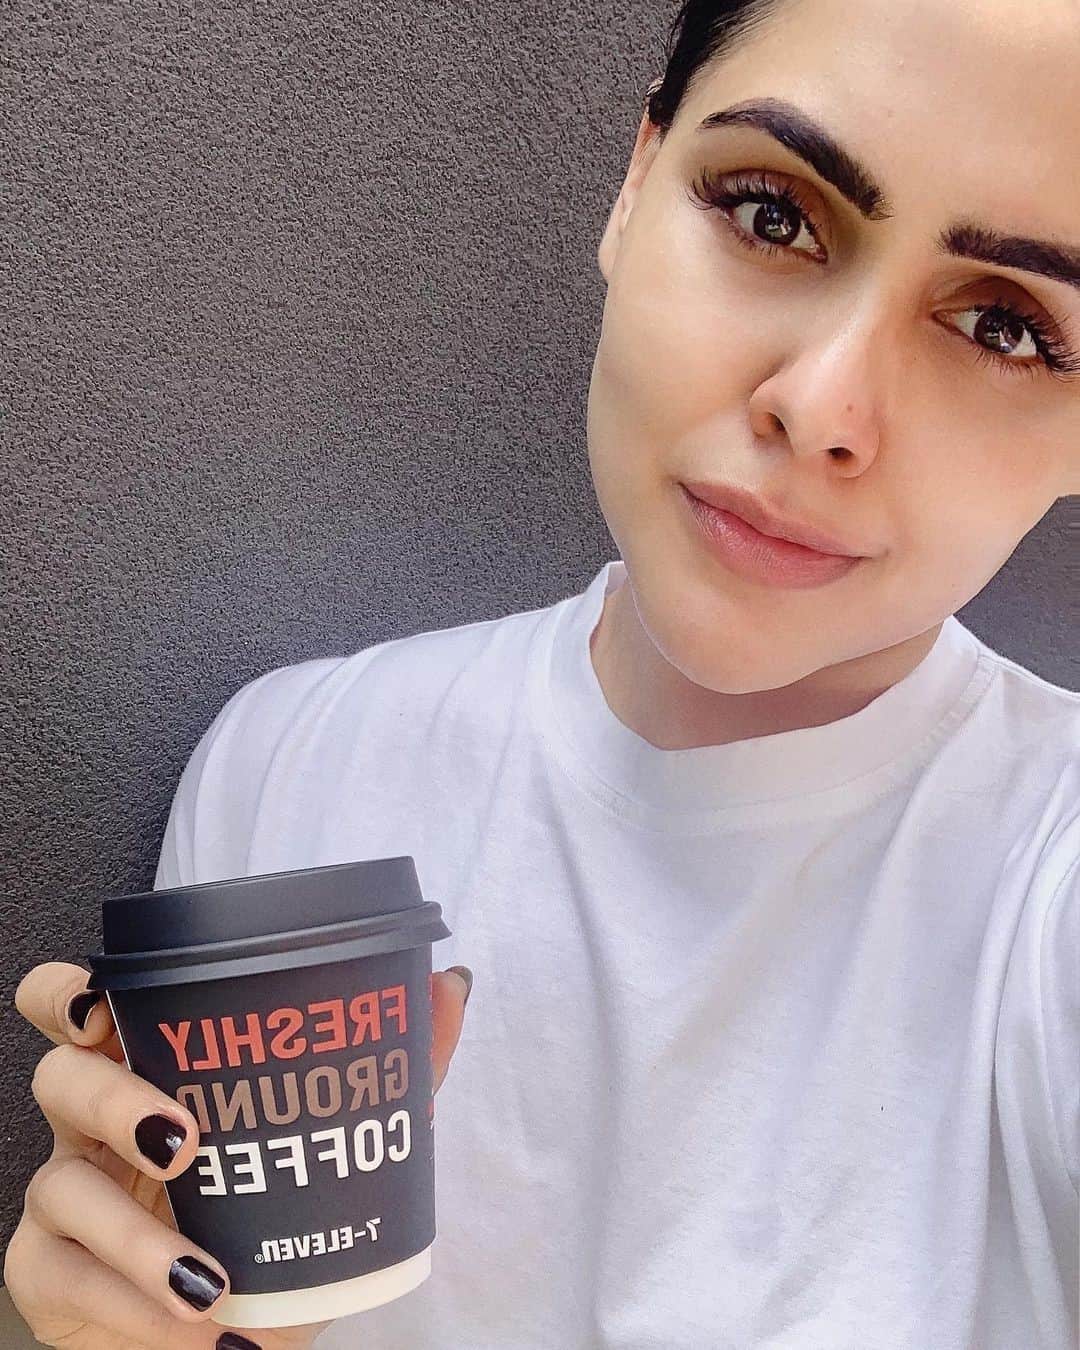 7-Eleven Australiaのインスタグラム：「Mornin' fellow coffee drinkers! Start your Wednesday on the right foot with a cup of freshly ground goodness ☕🙂  📷 @ashworethat」